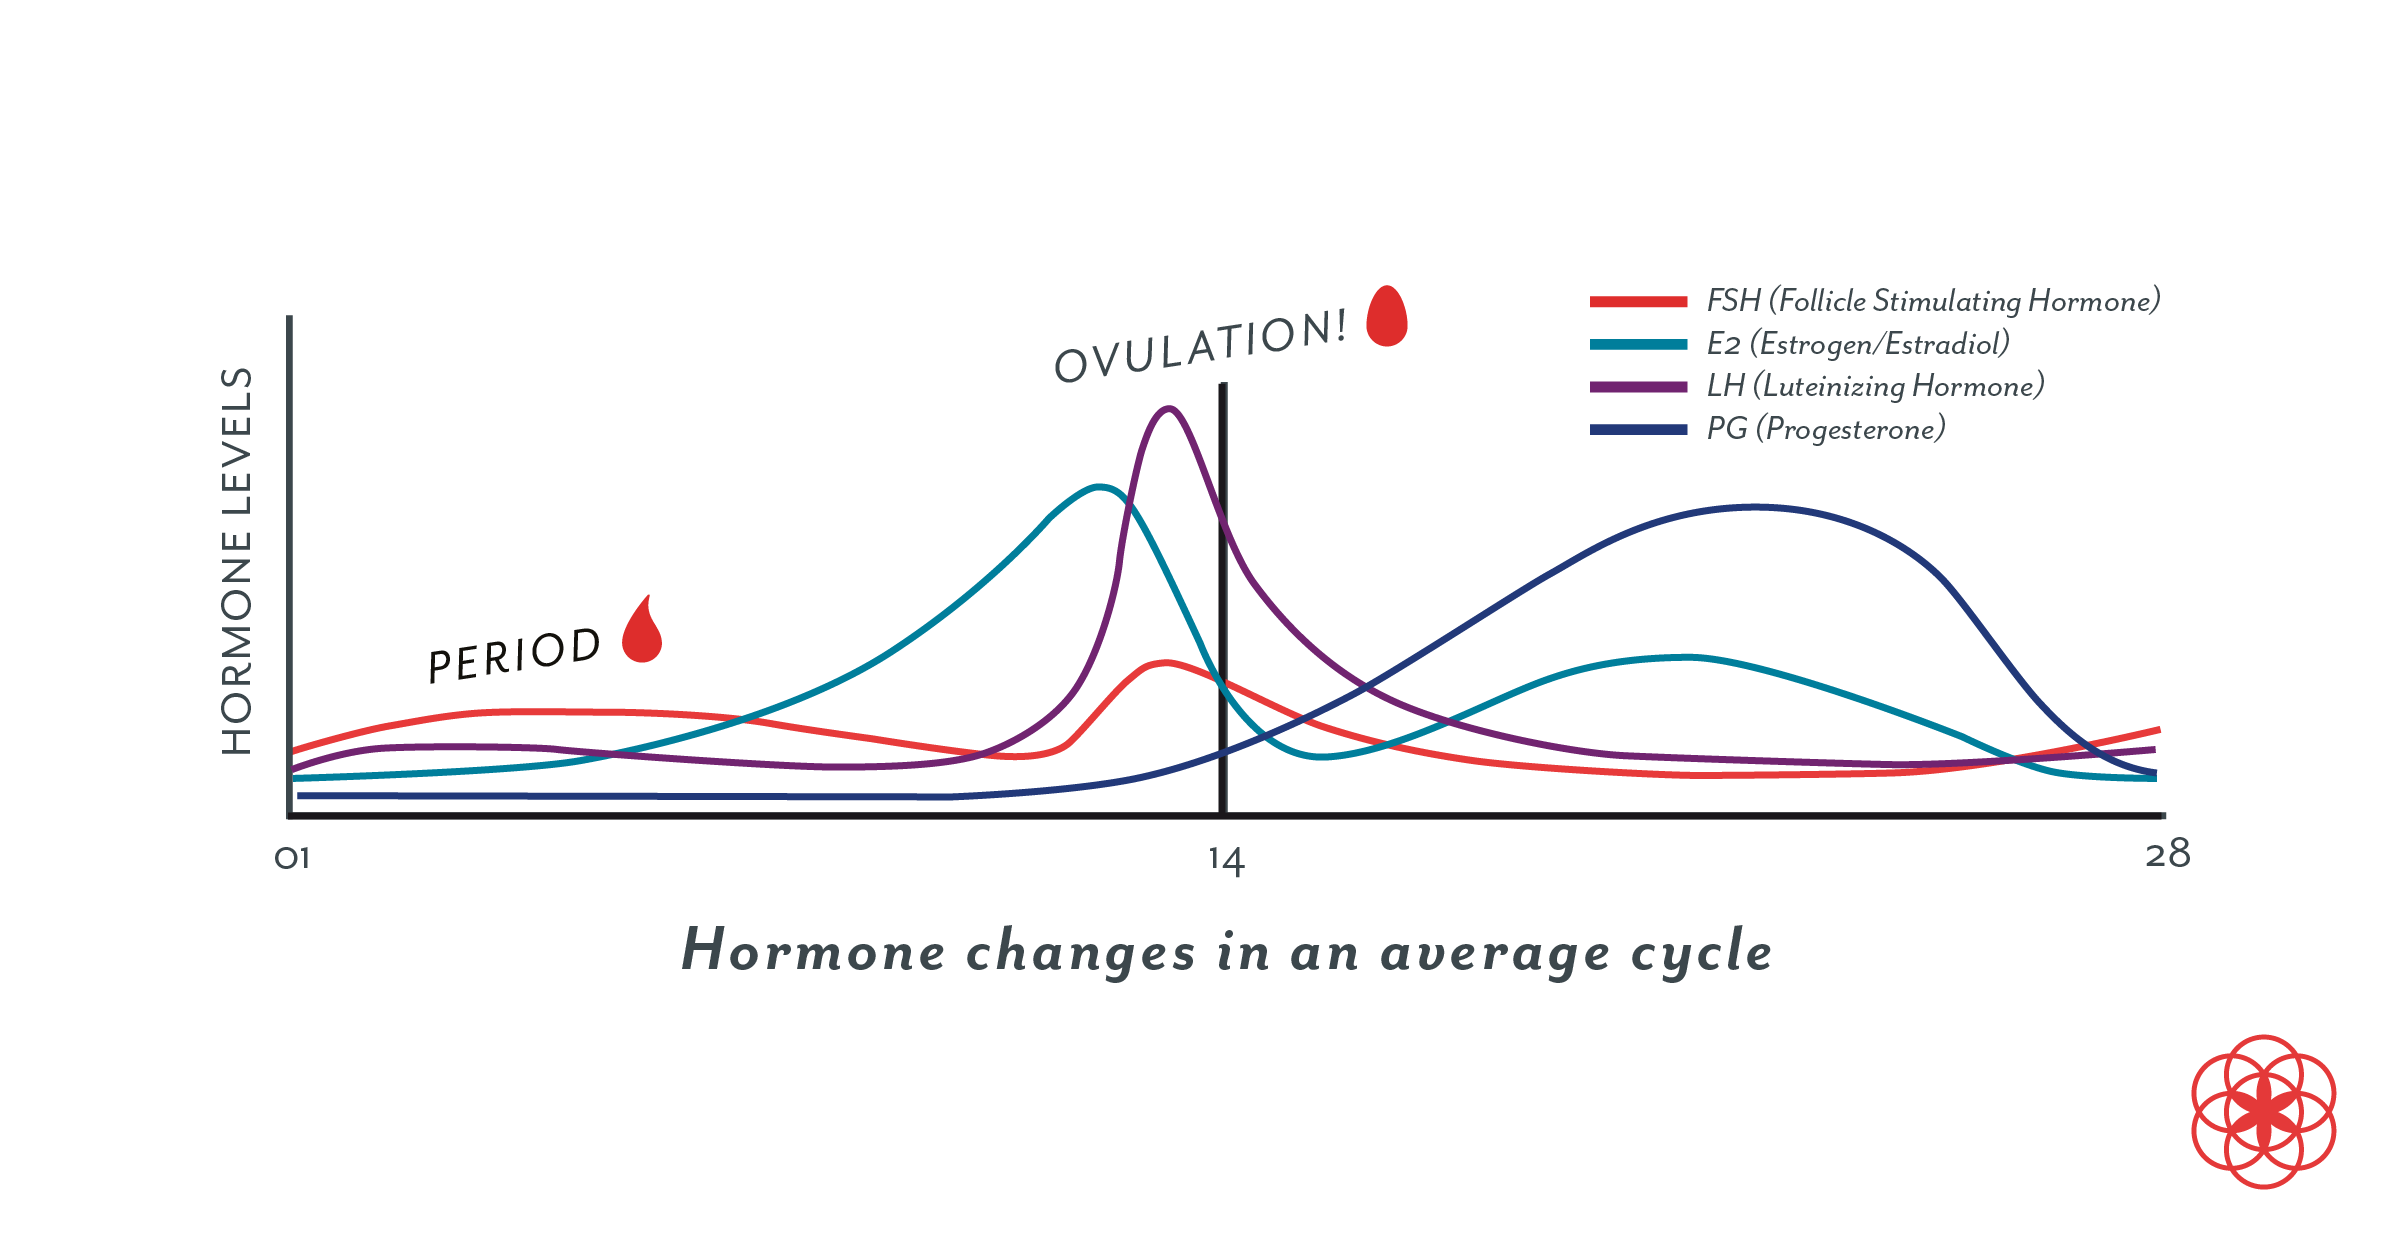 Red Rock Fertility on X: In the Luteal Phase, increased estrogen